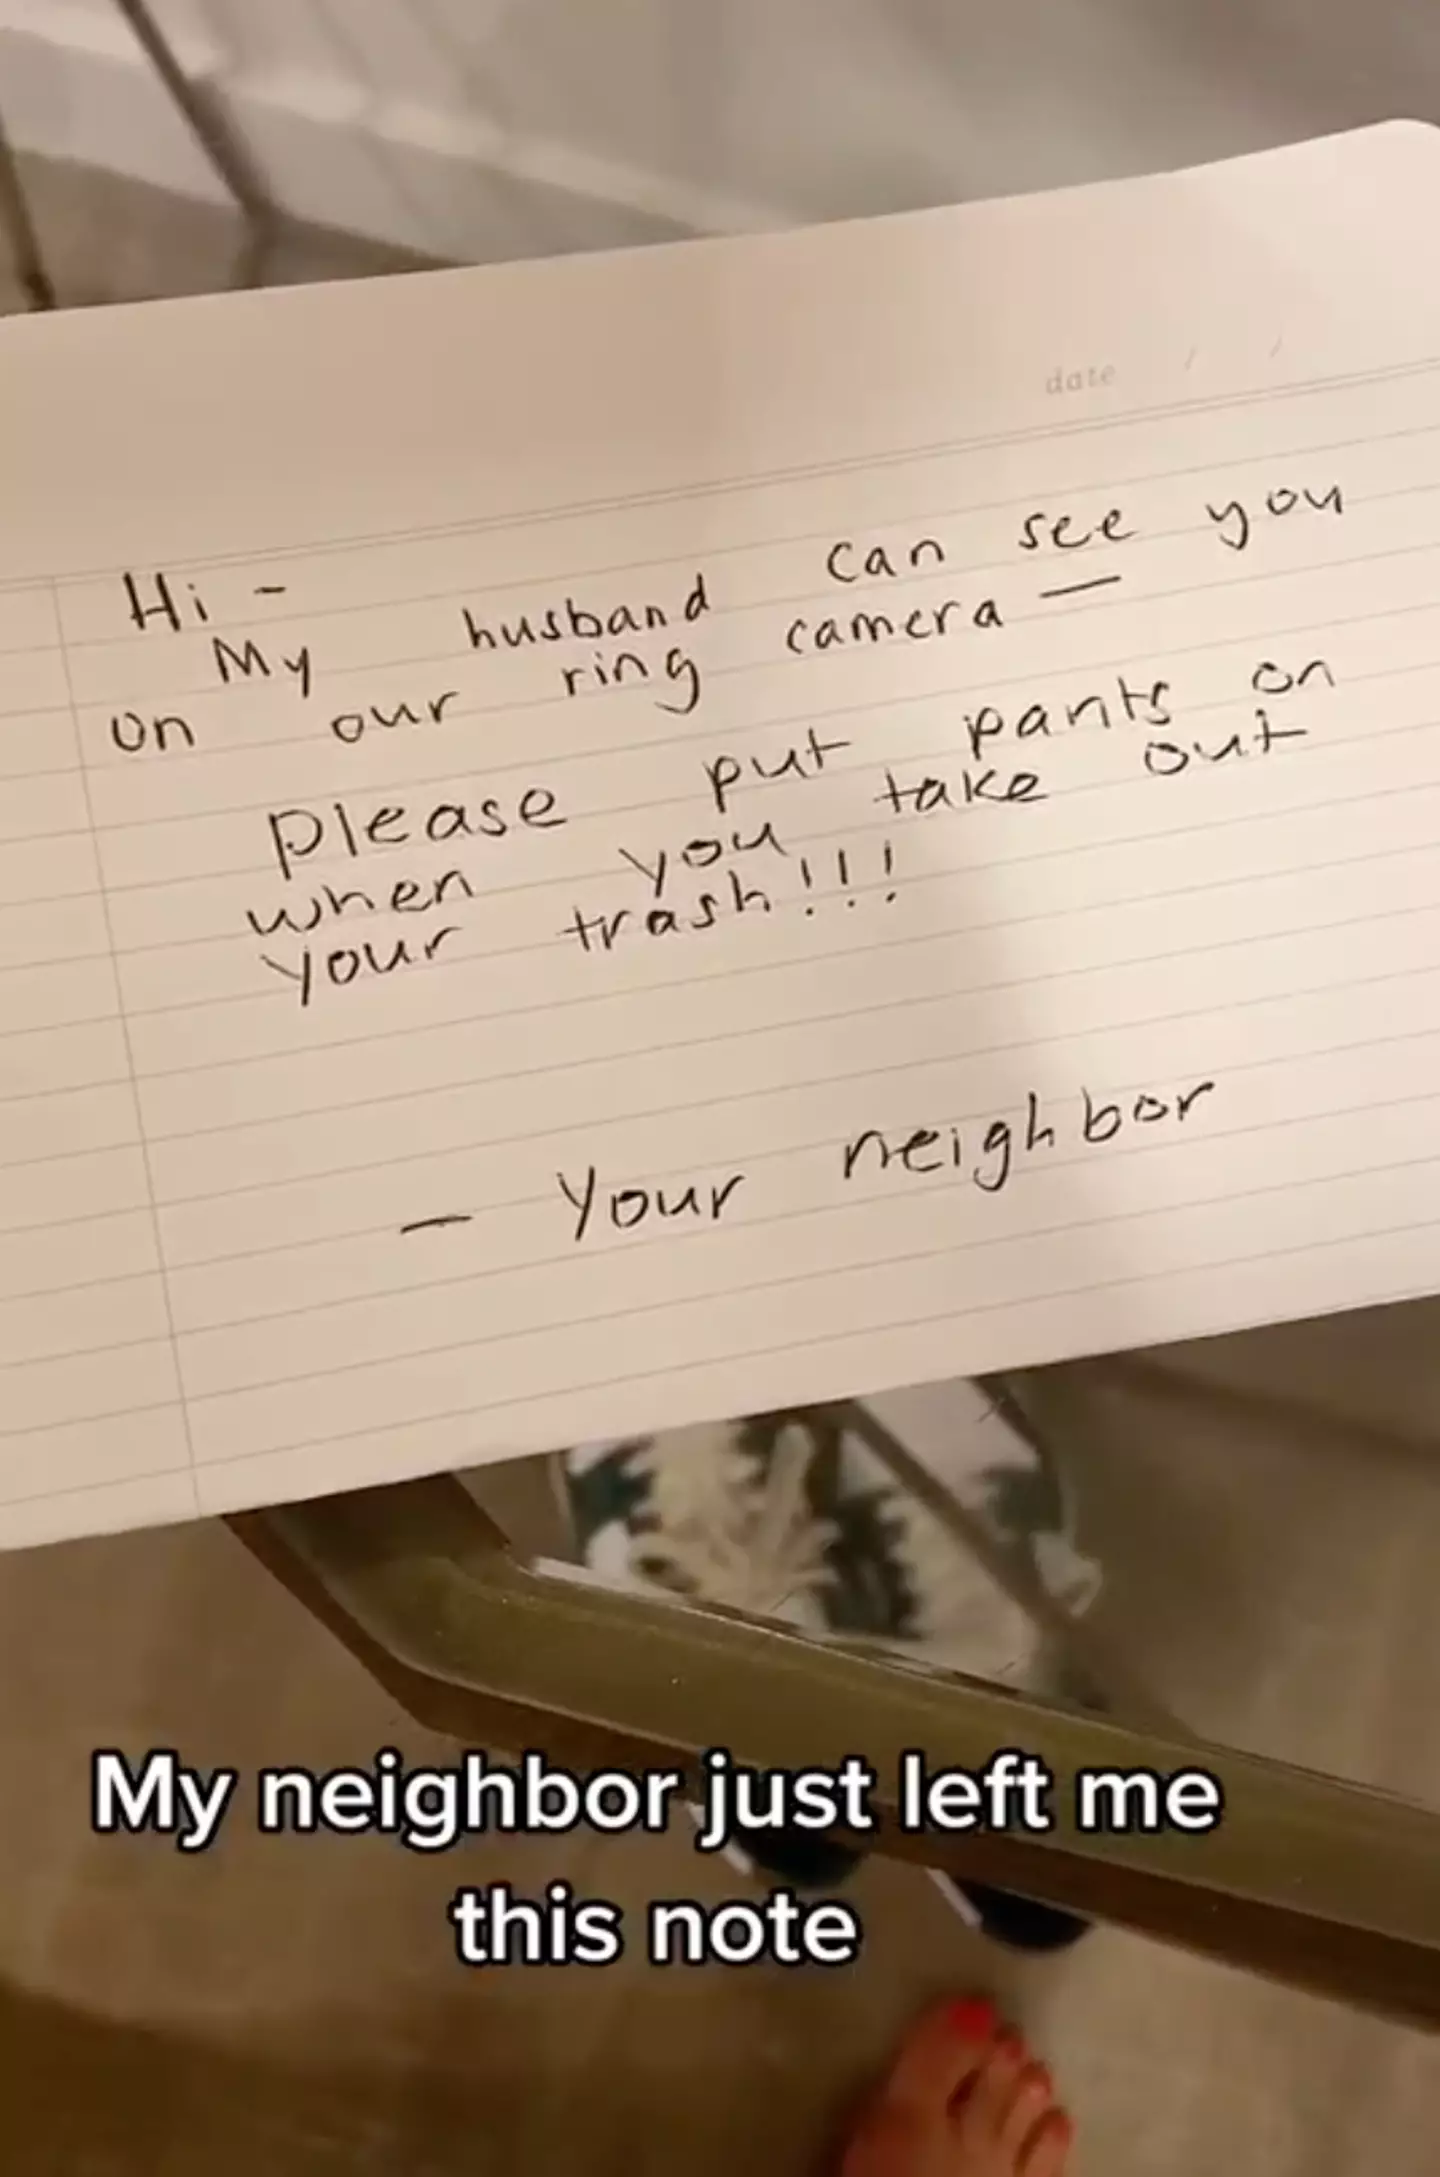 The neighbour sent the woman a note.